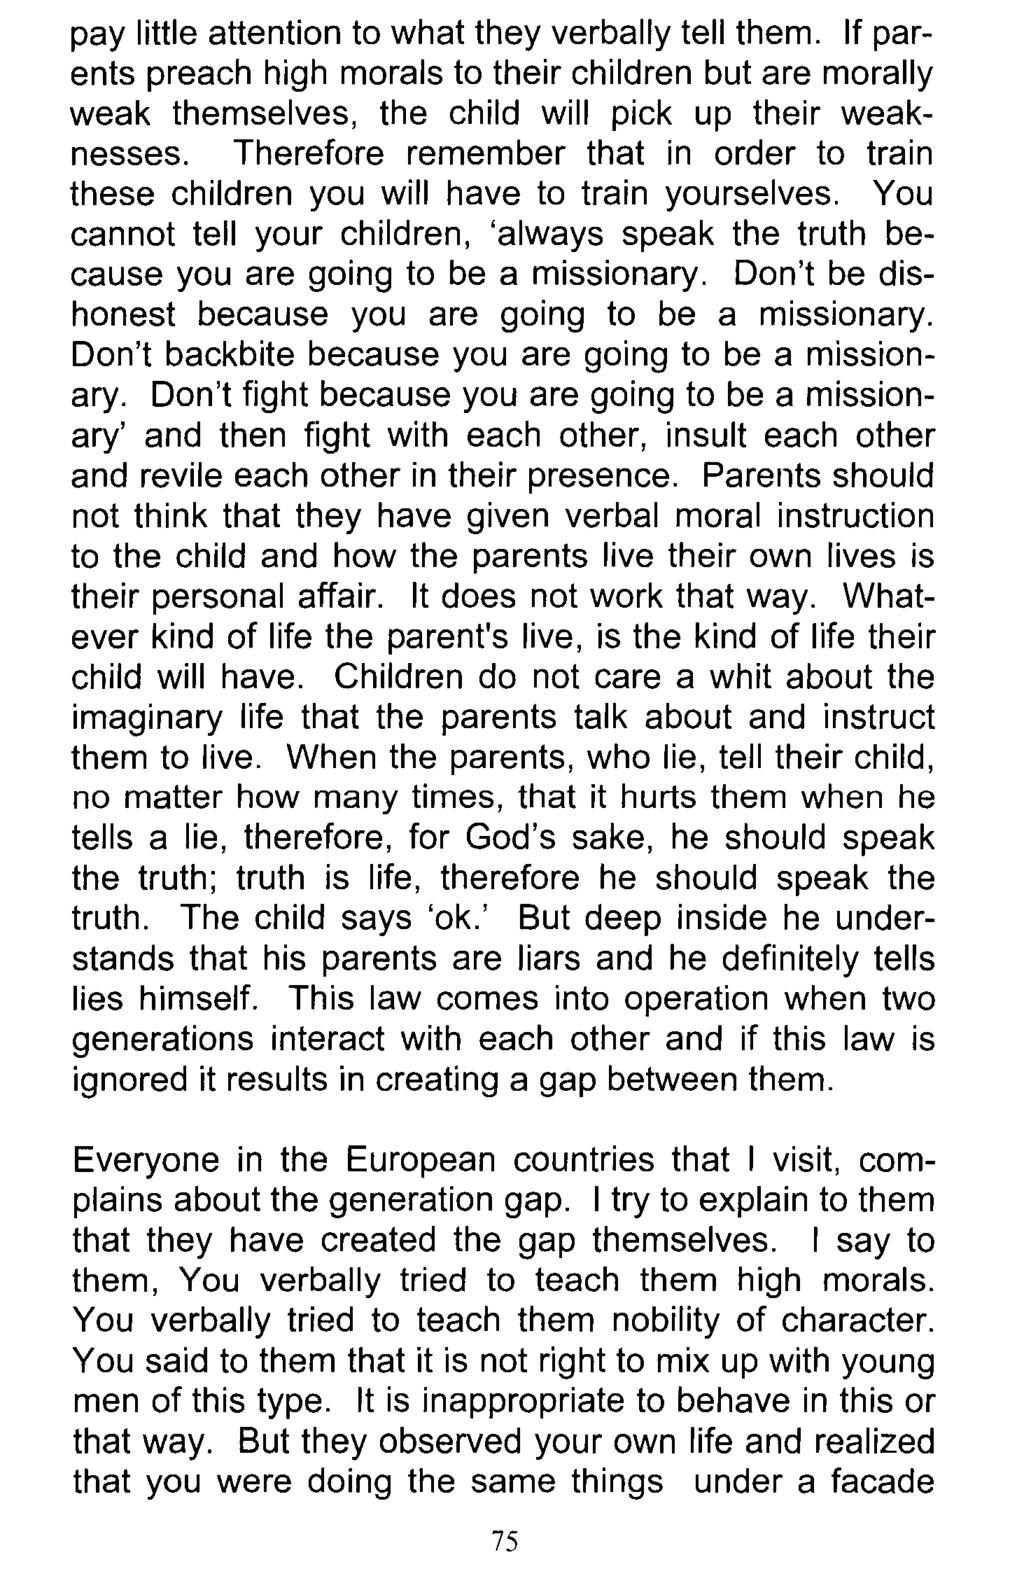 pay little attention to what they verbally tell them. If parents preach high morals to their children but are morally weak themselves, the child will pick up their weaknesses.